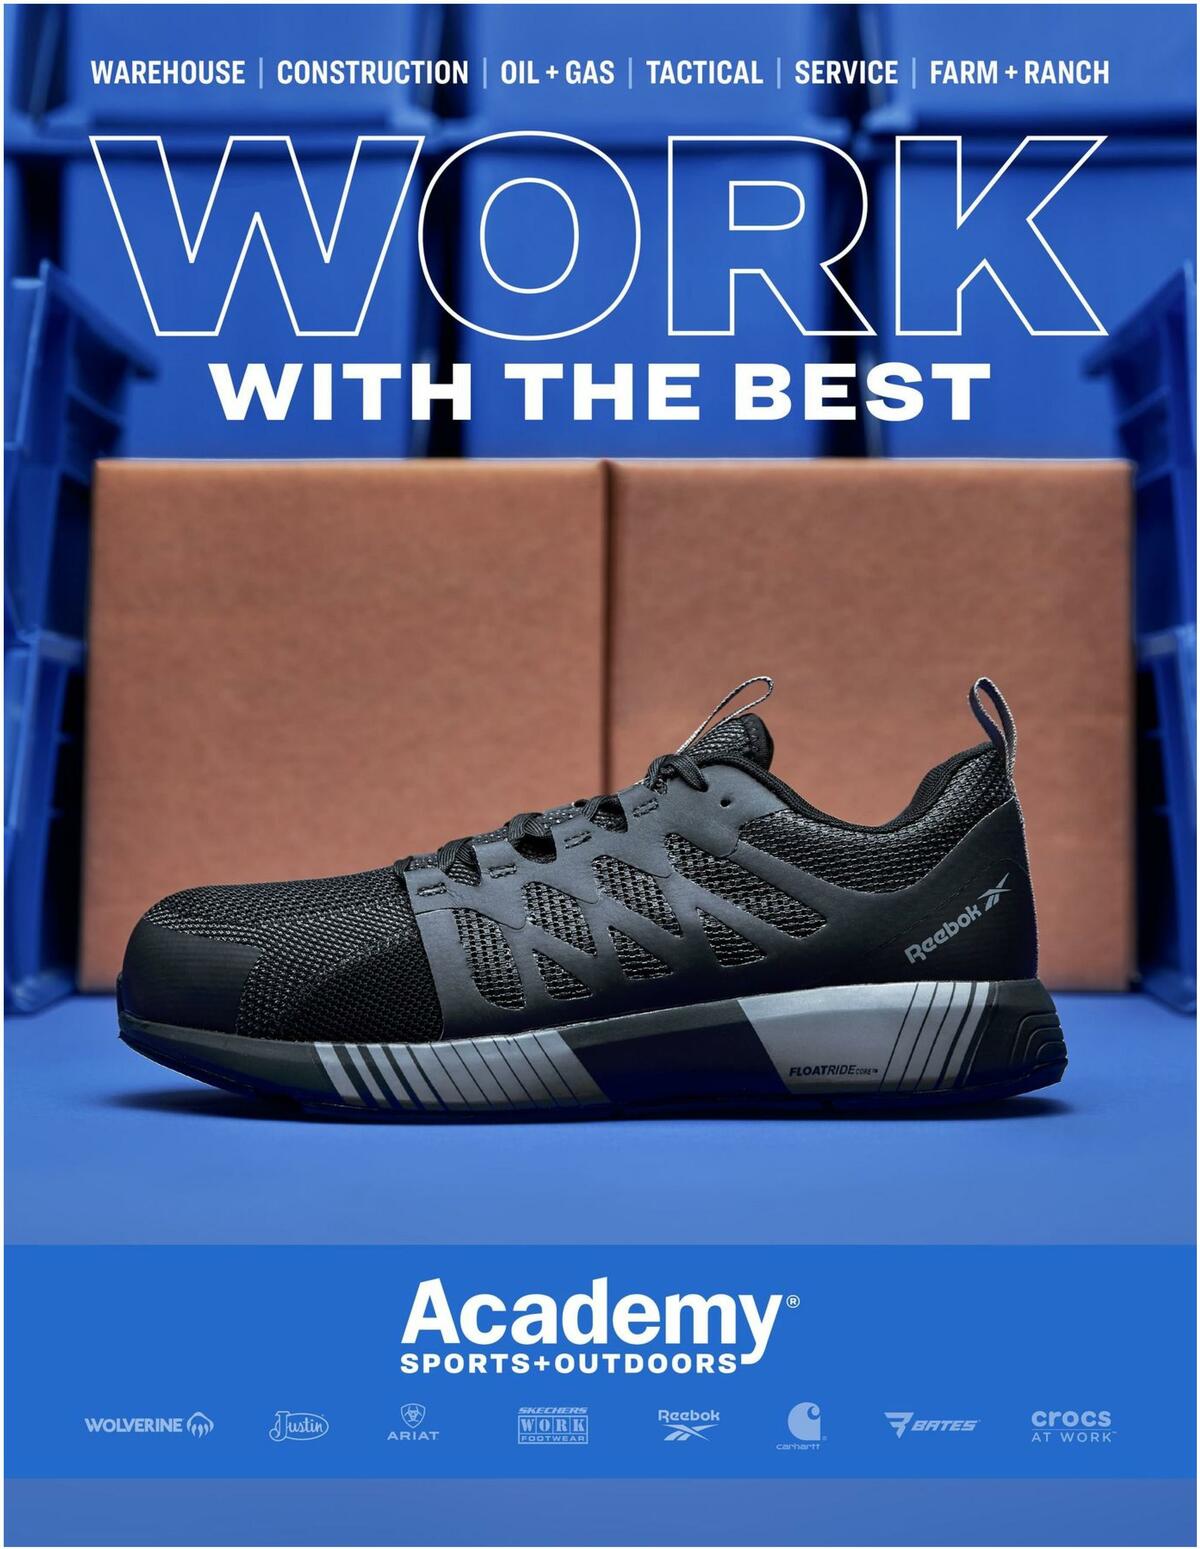 Academy Sports + Outdoors Fall Workwear Guide Weekly Ad from September 13